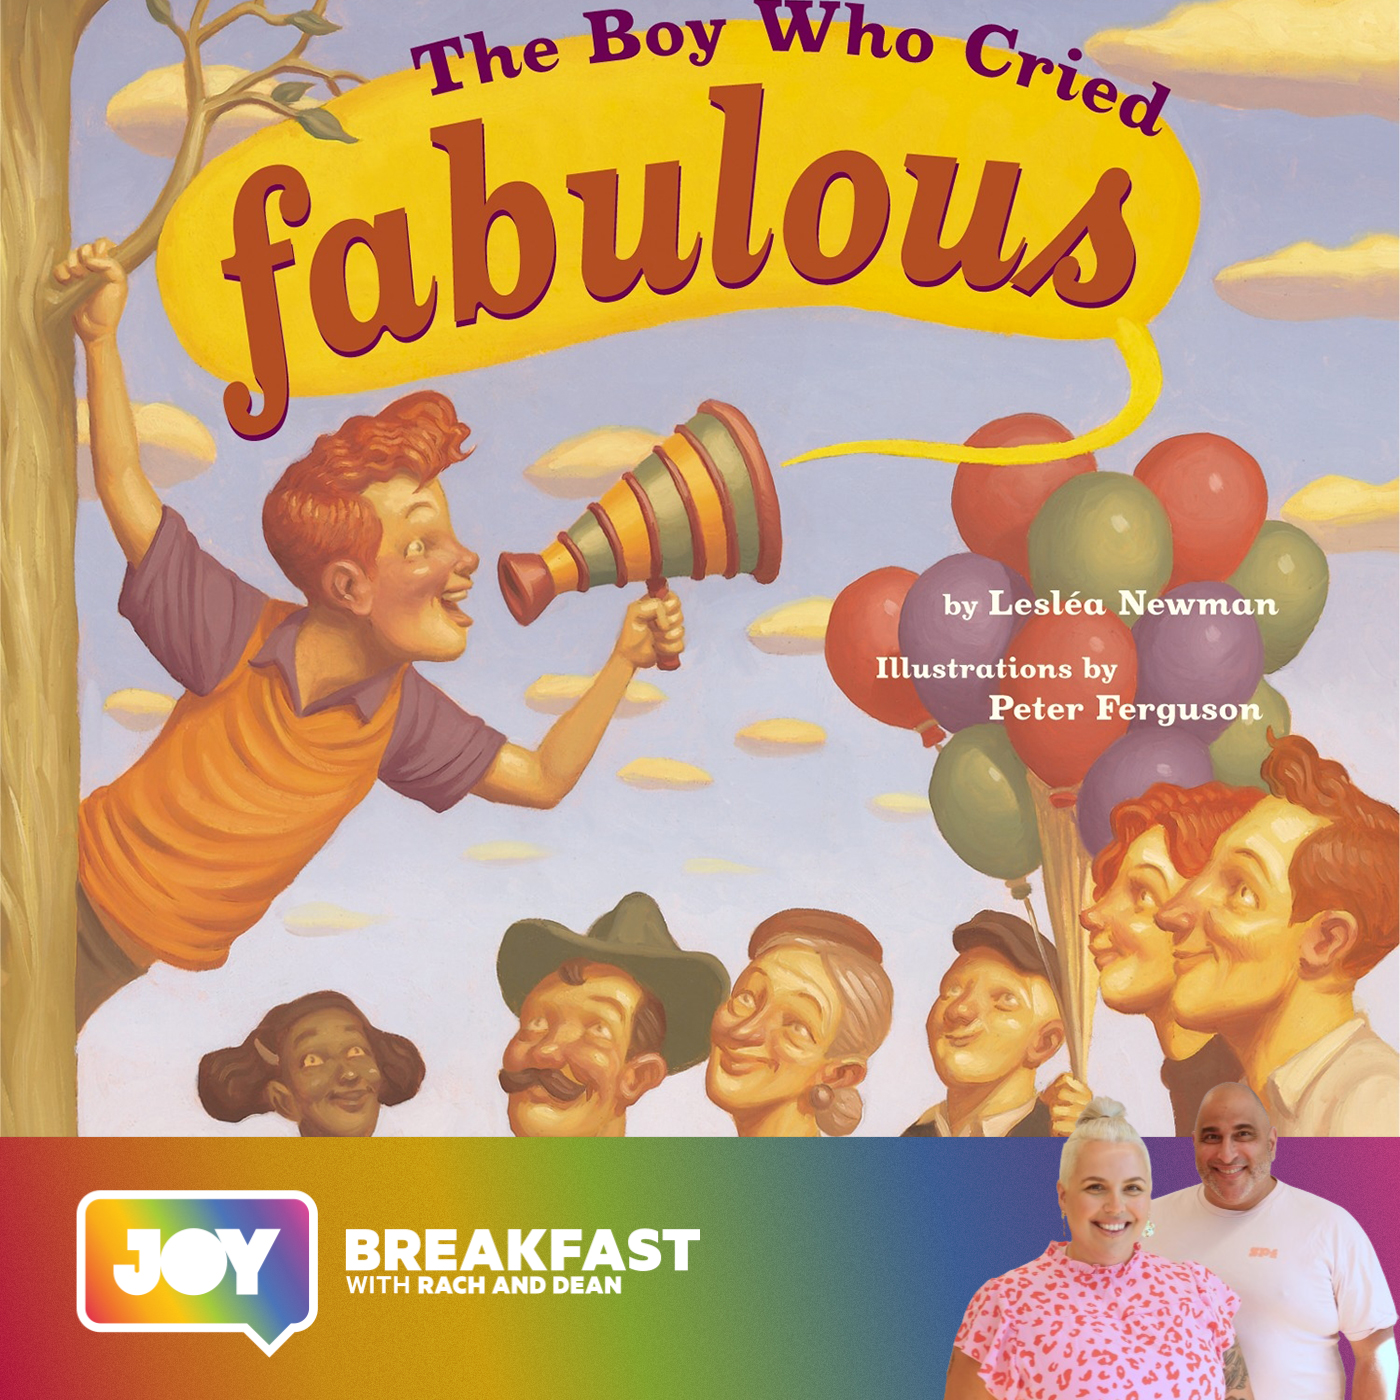 The boy who cried FABULOUS – QUILTBAG Story Time